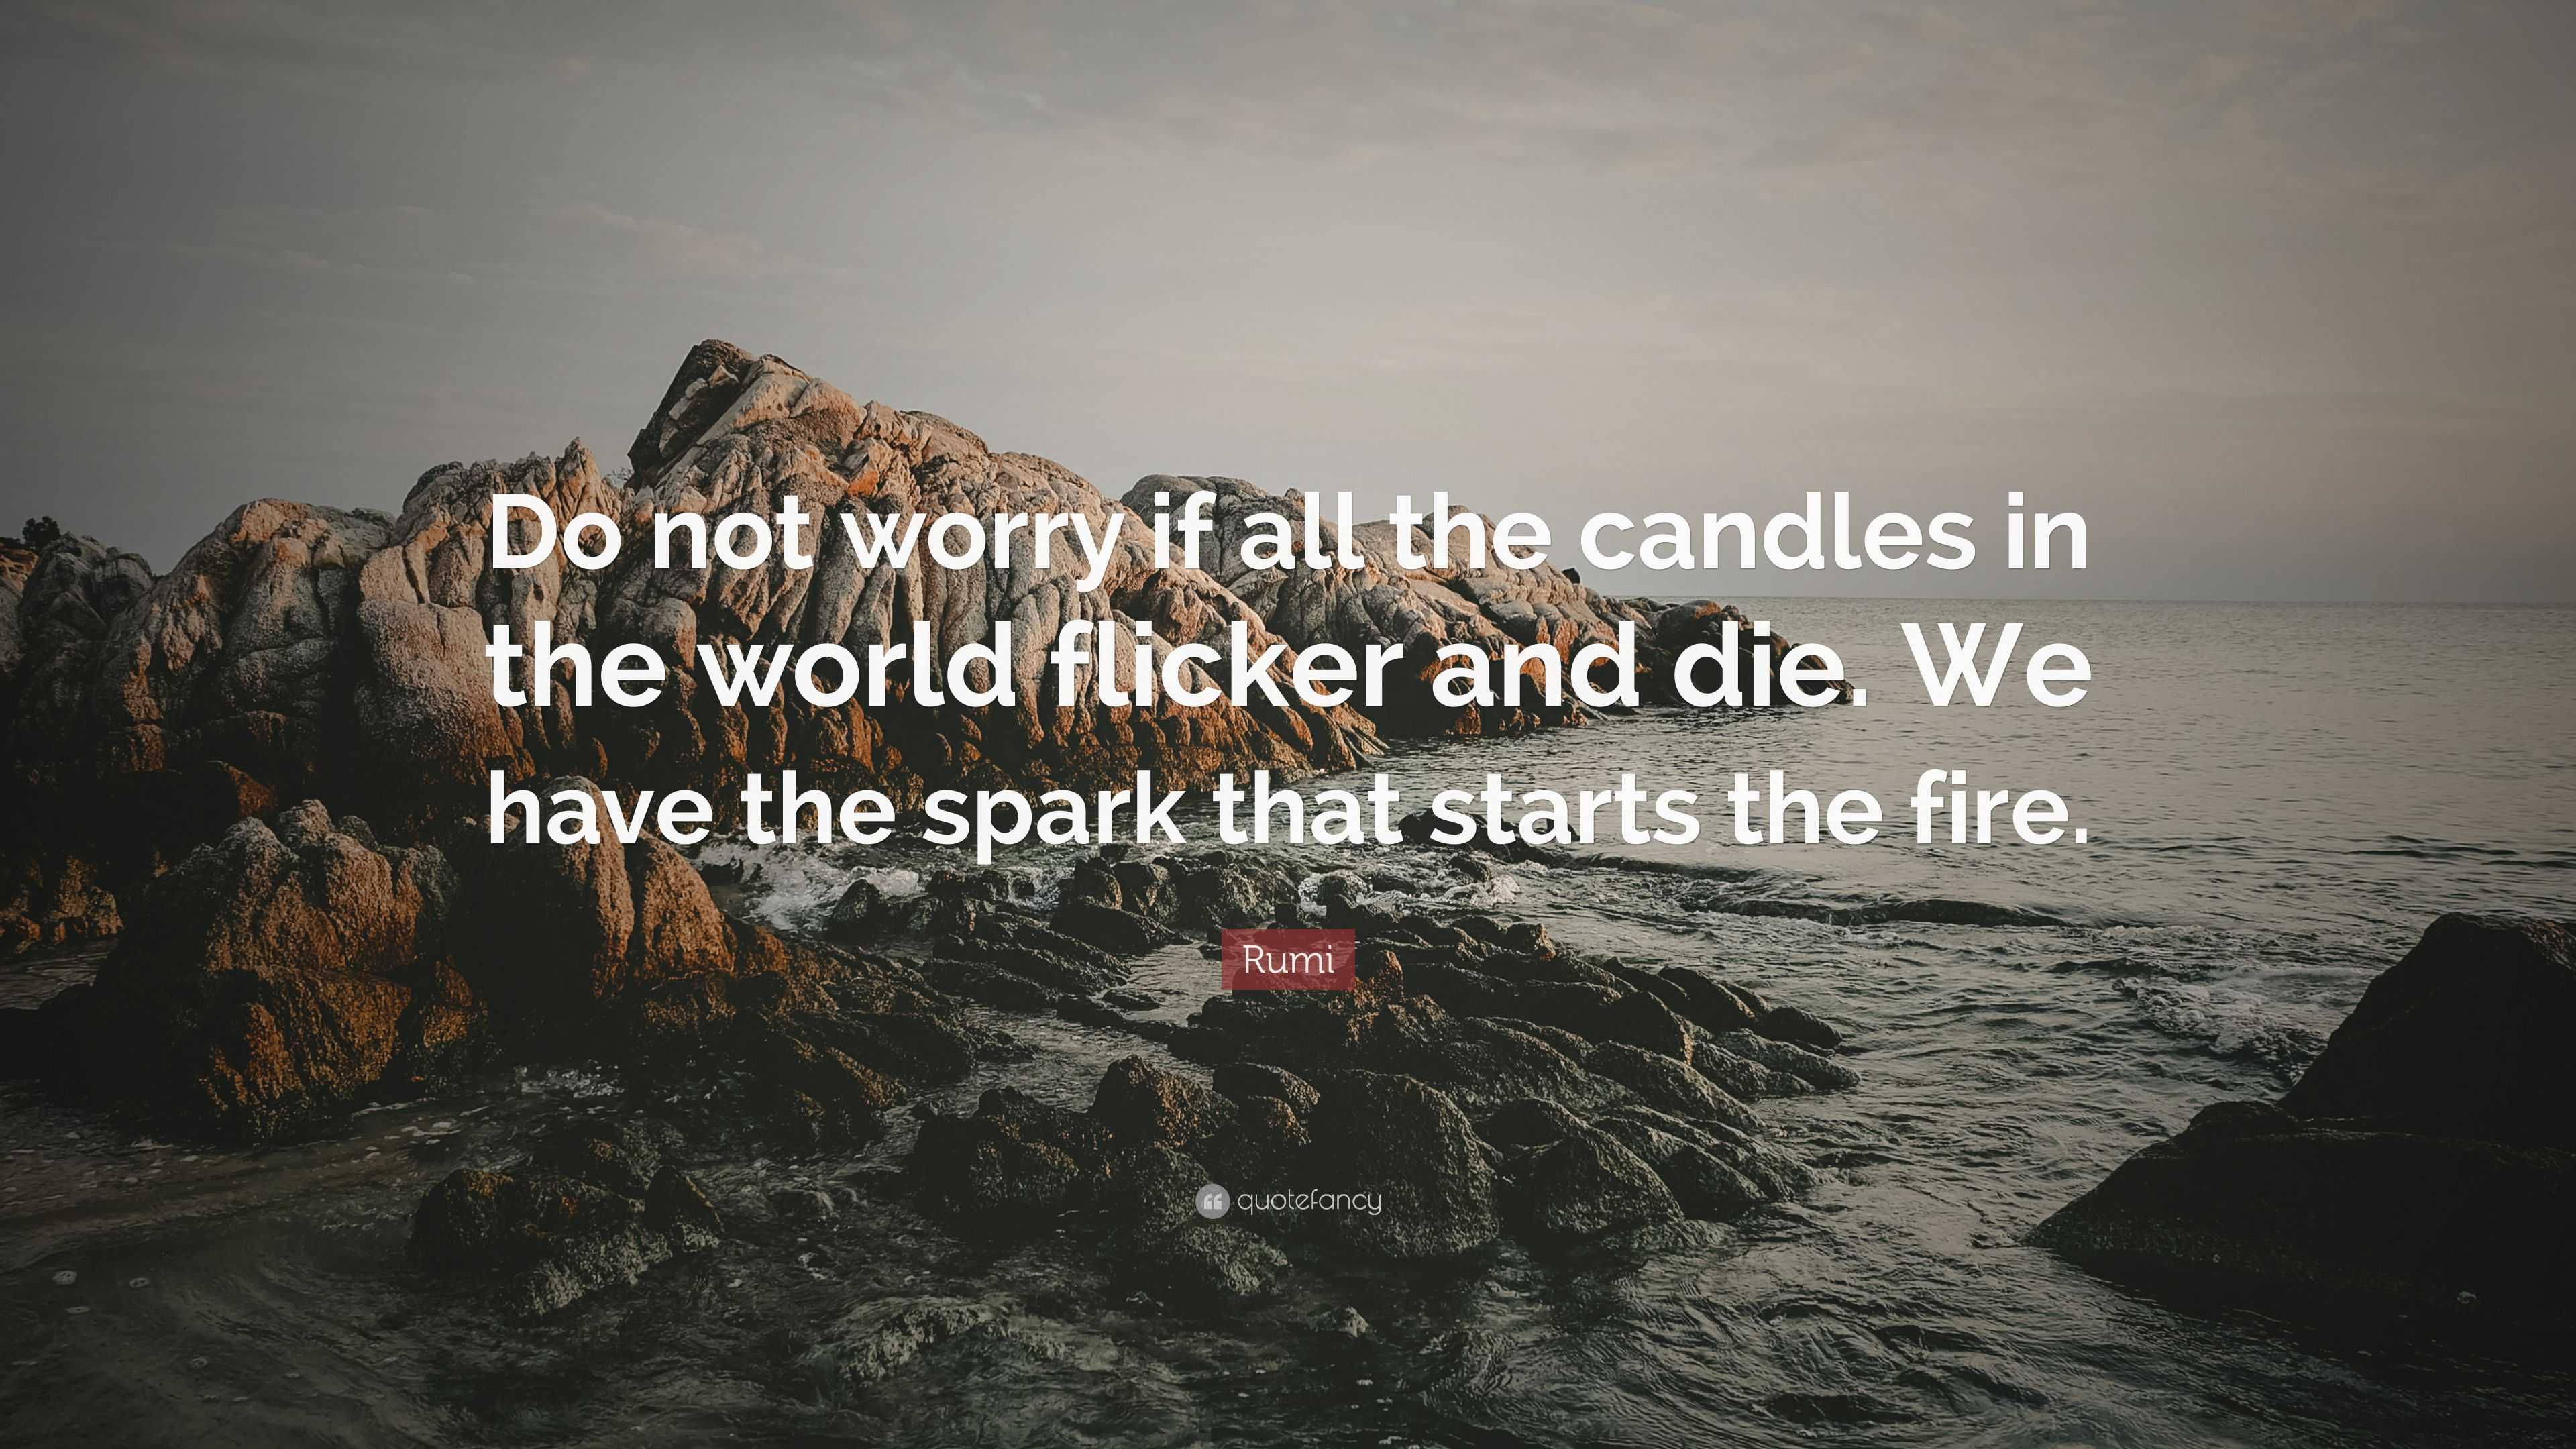 Rumi Quote: “Do not worry if all the candles in the world flicker and ...